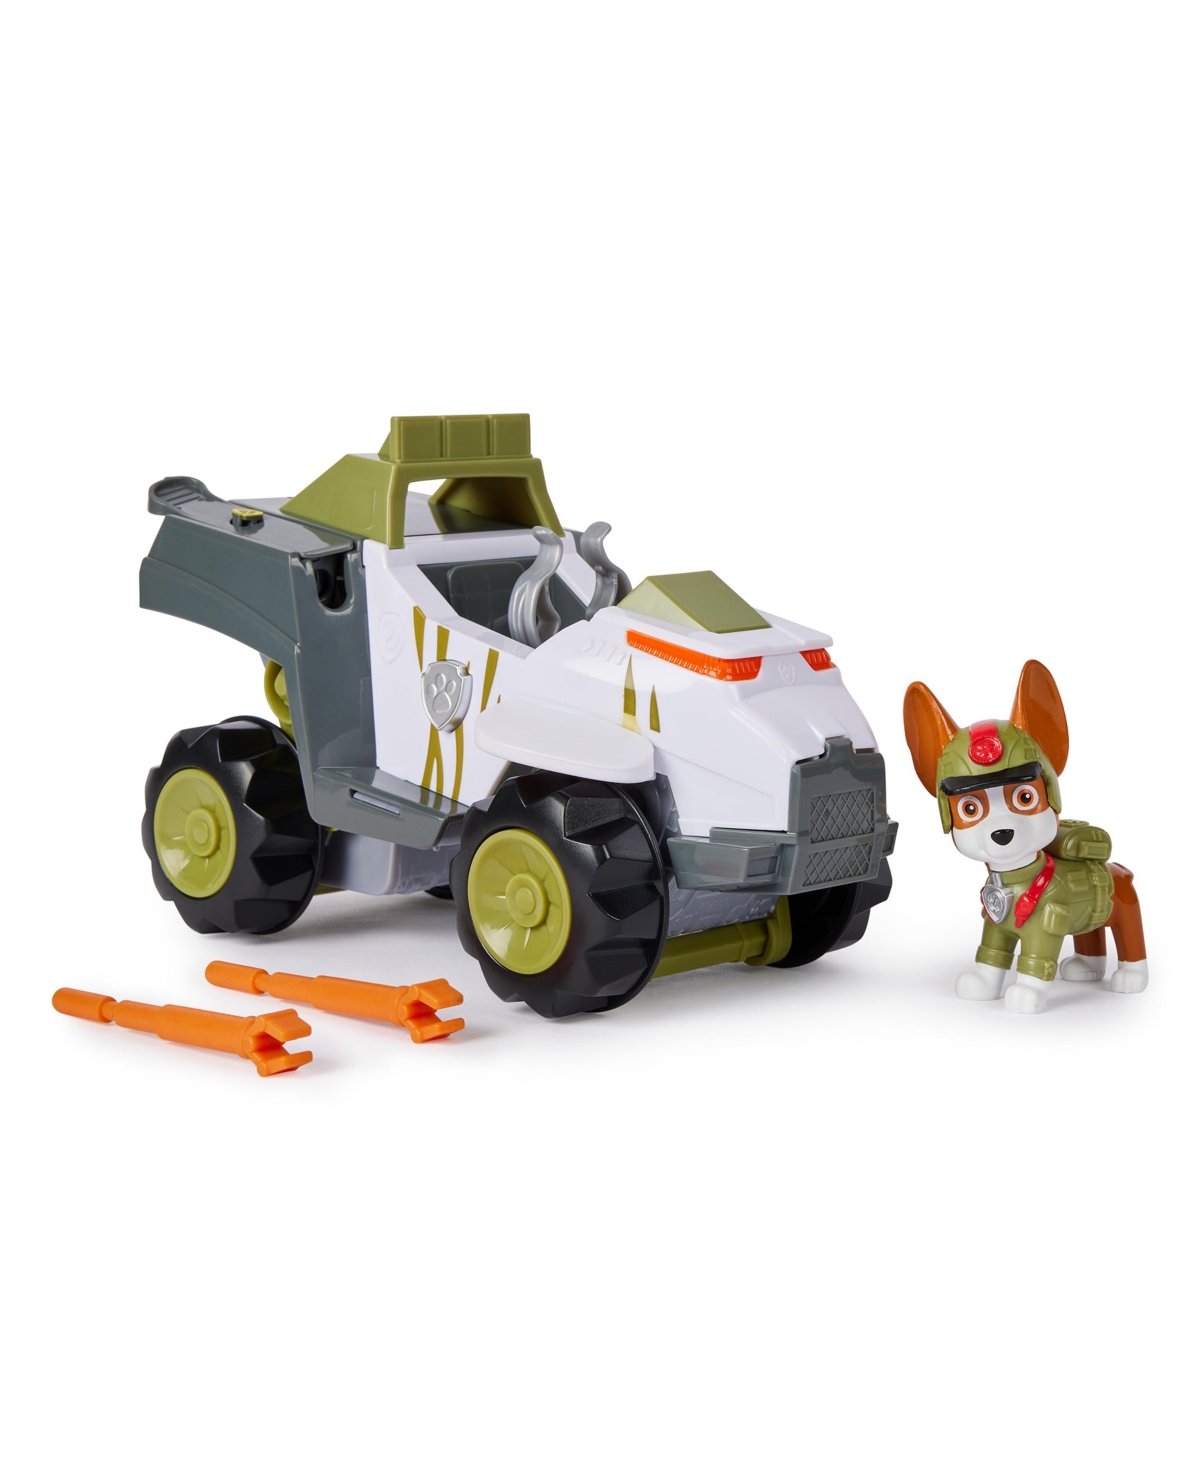 Shop Paw Patrol Jungle Pups, Tracker's Monkey Vehicle, Toy Truck With Collectible Action Figure In Multi-color